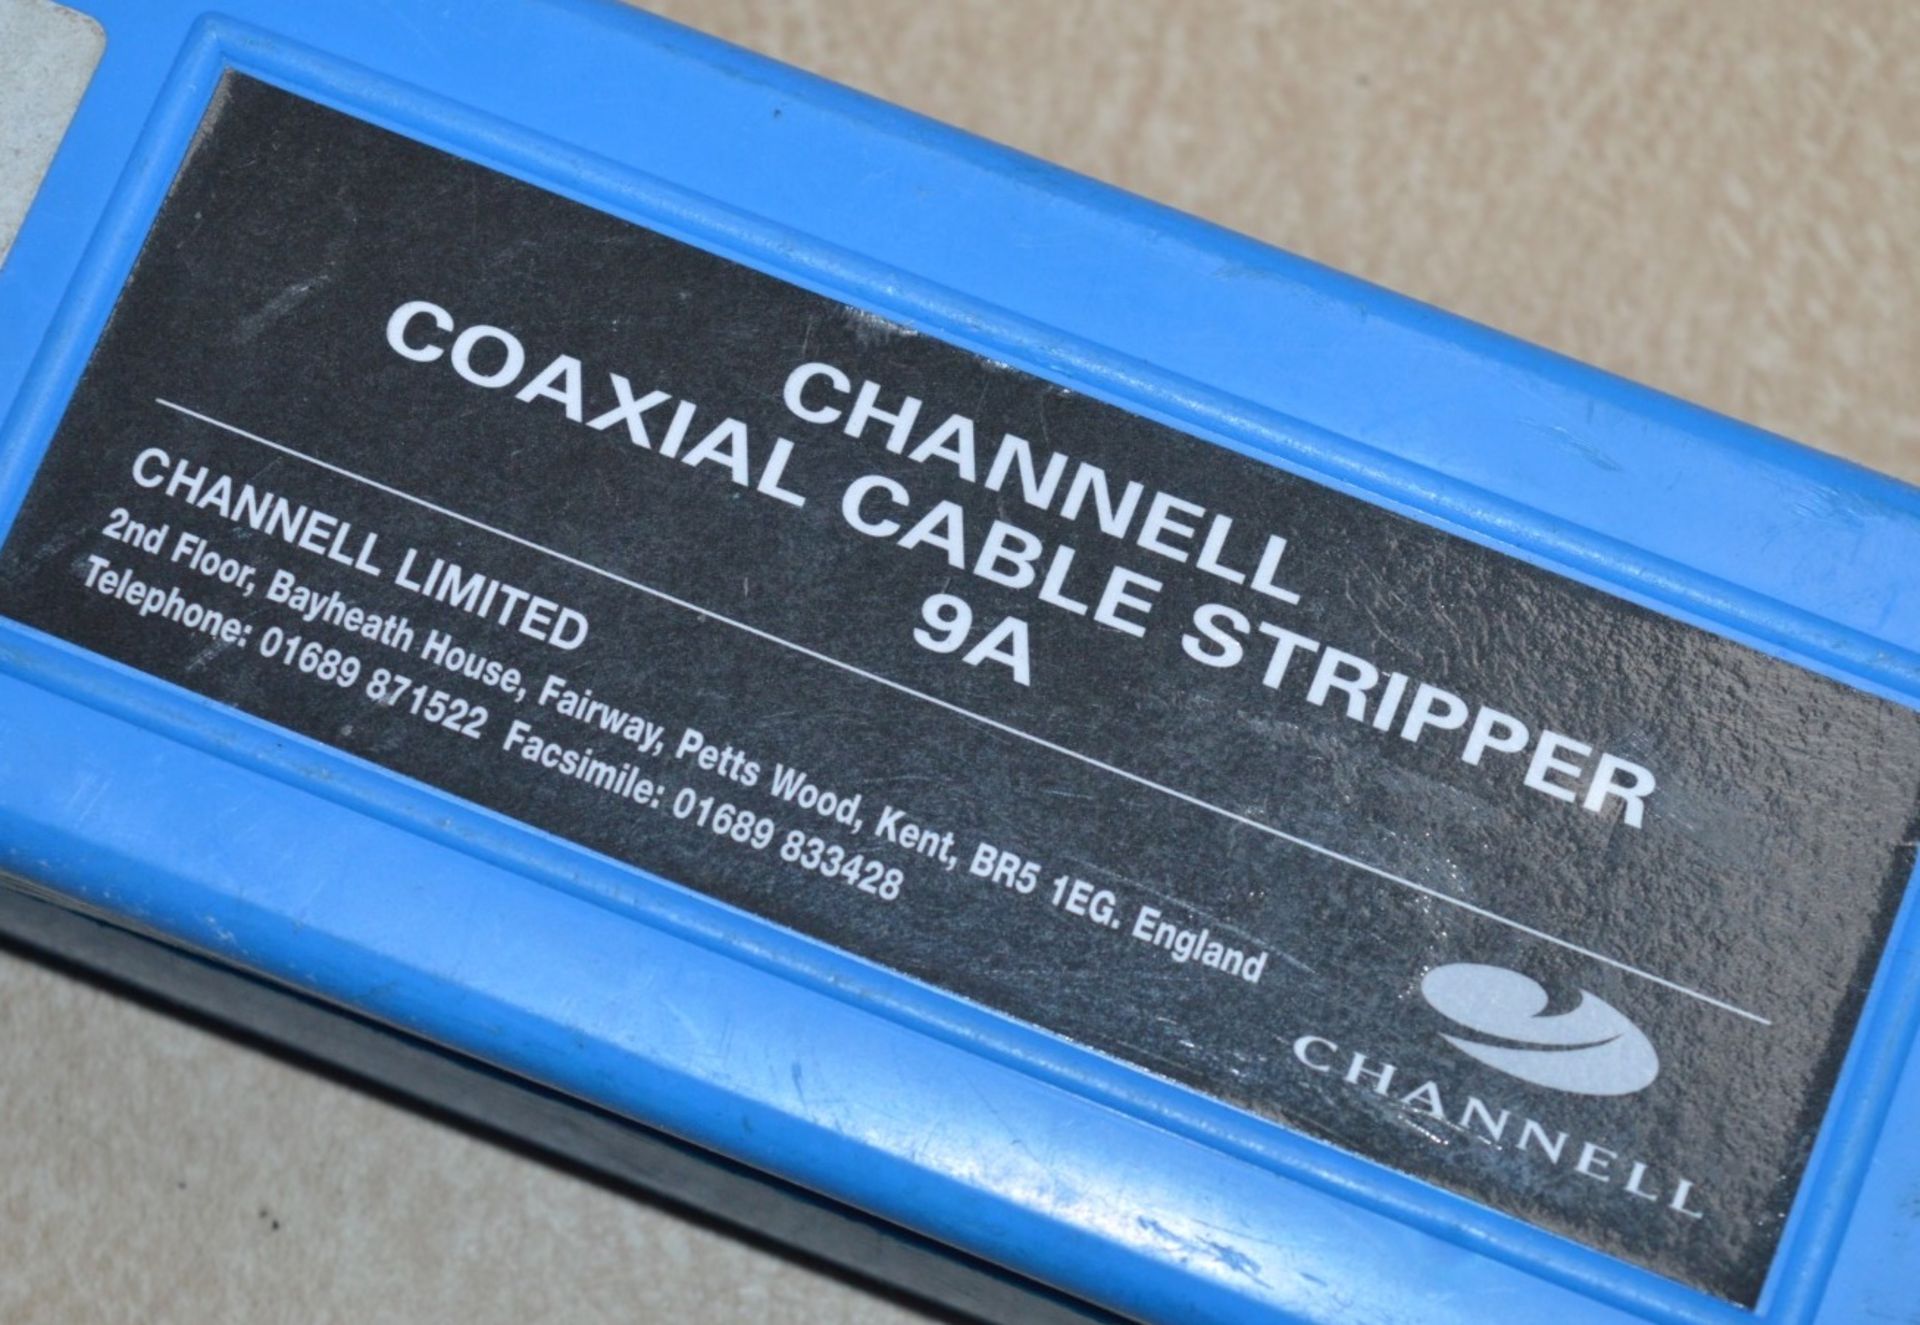 4 x Channell Coaxial Cable Strippers - Model 9A - In Cases With Accessories - CL011 - Ref JP936 - - Bild 2 aus 6